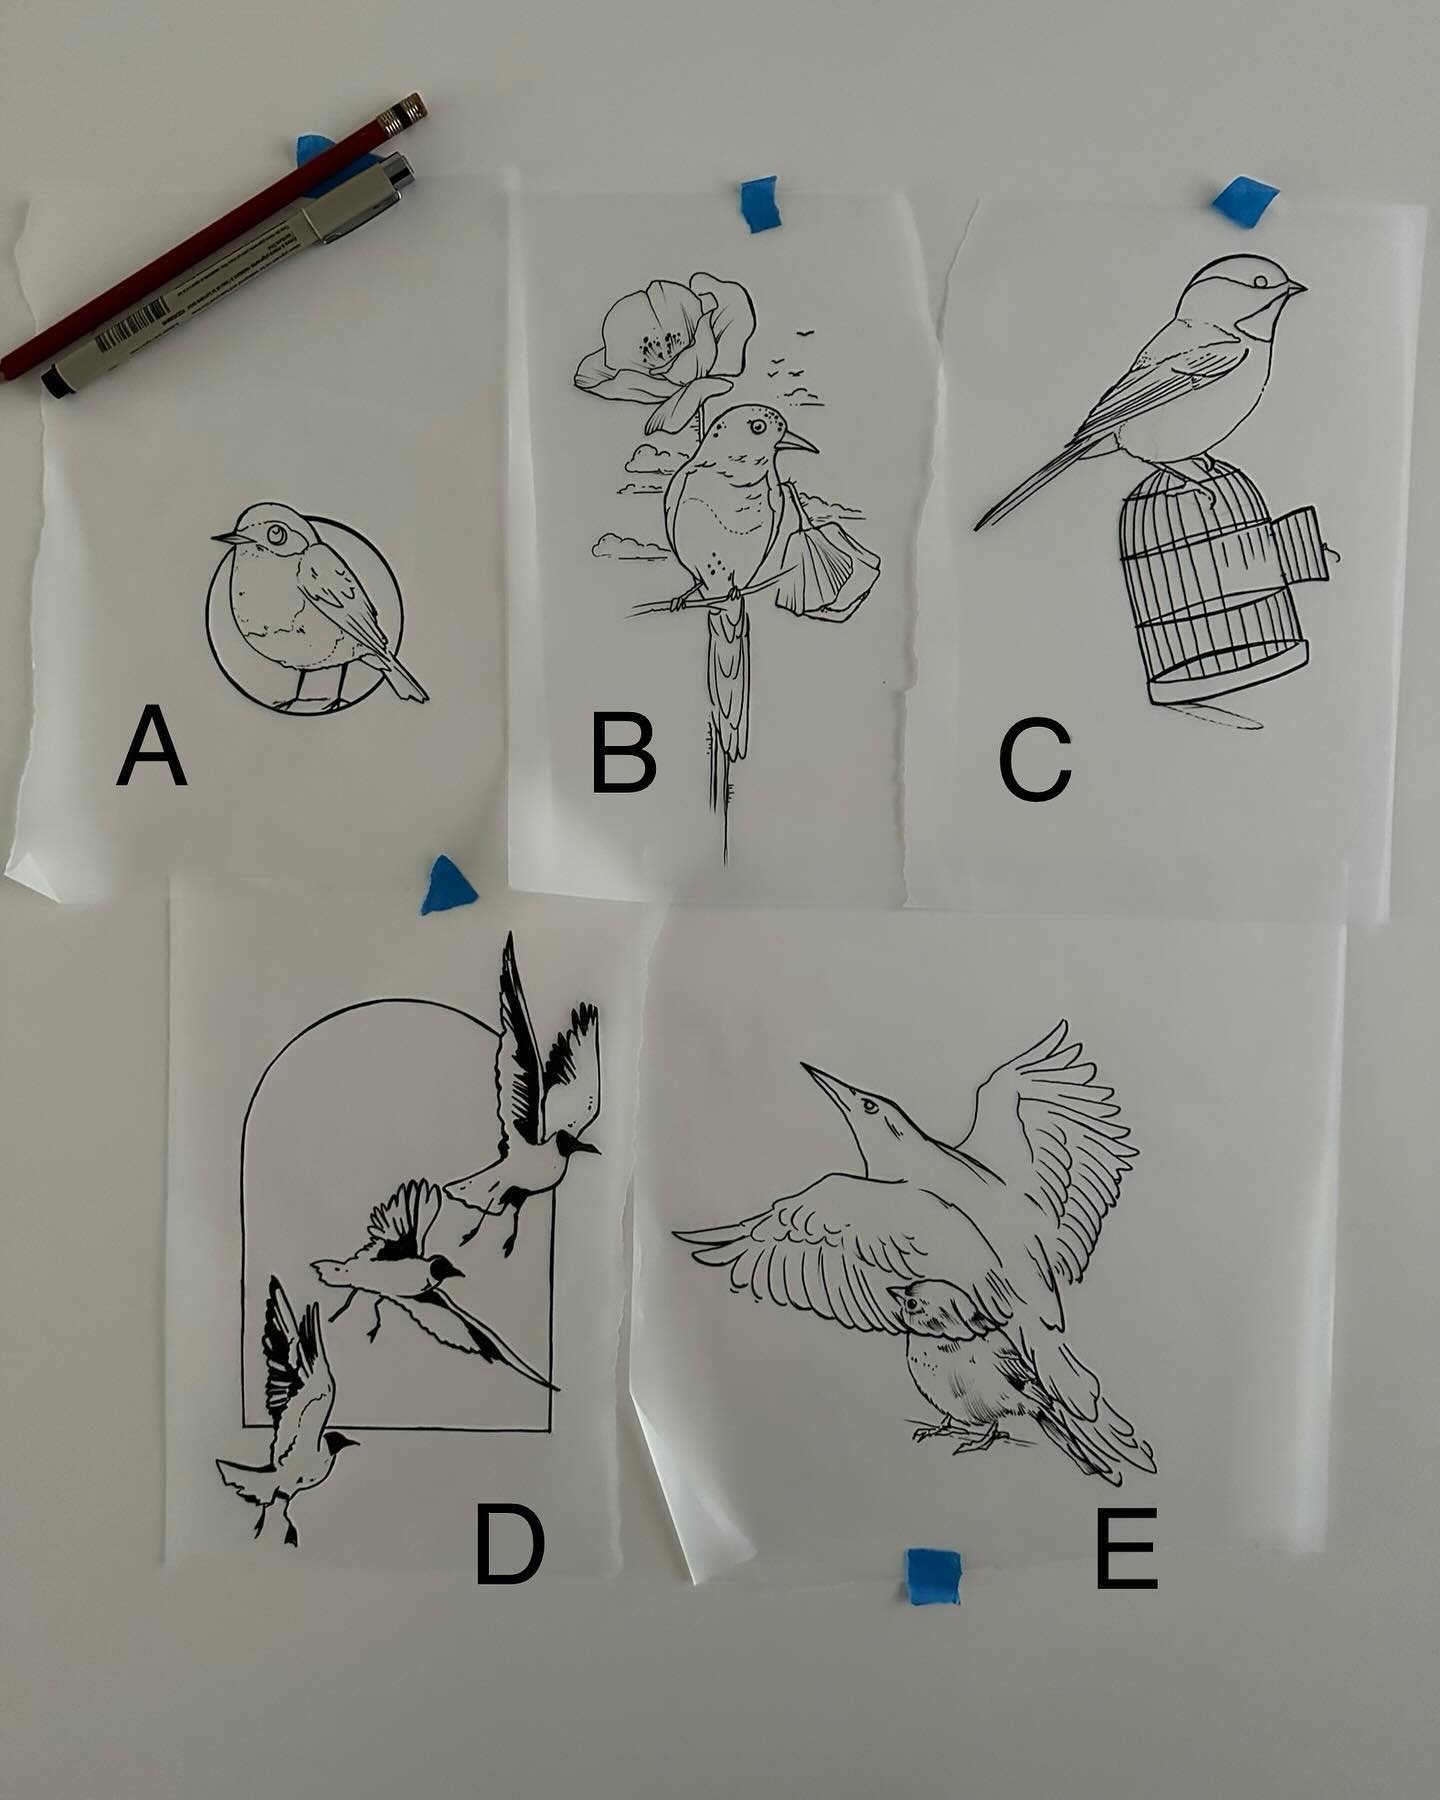 Birds I drew that I&rsquo;d like to tattoo. Want one? EMAIL chipperharbin@yahoo.com and specify A, B, C, D, or E